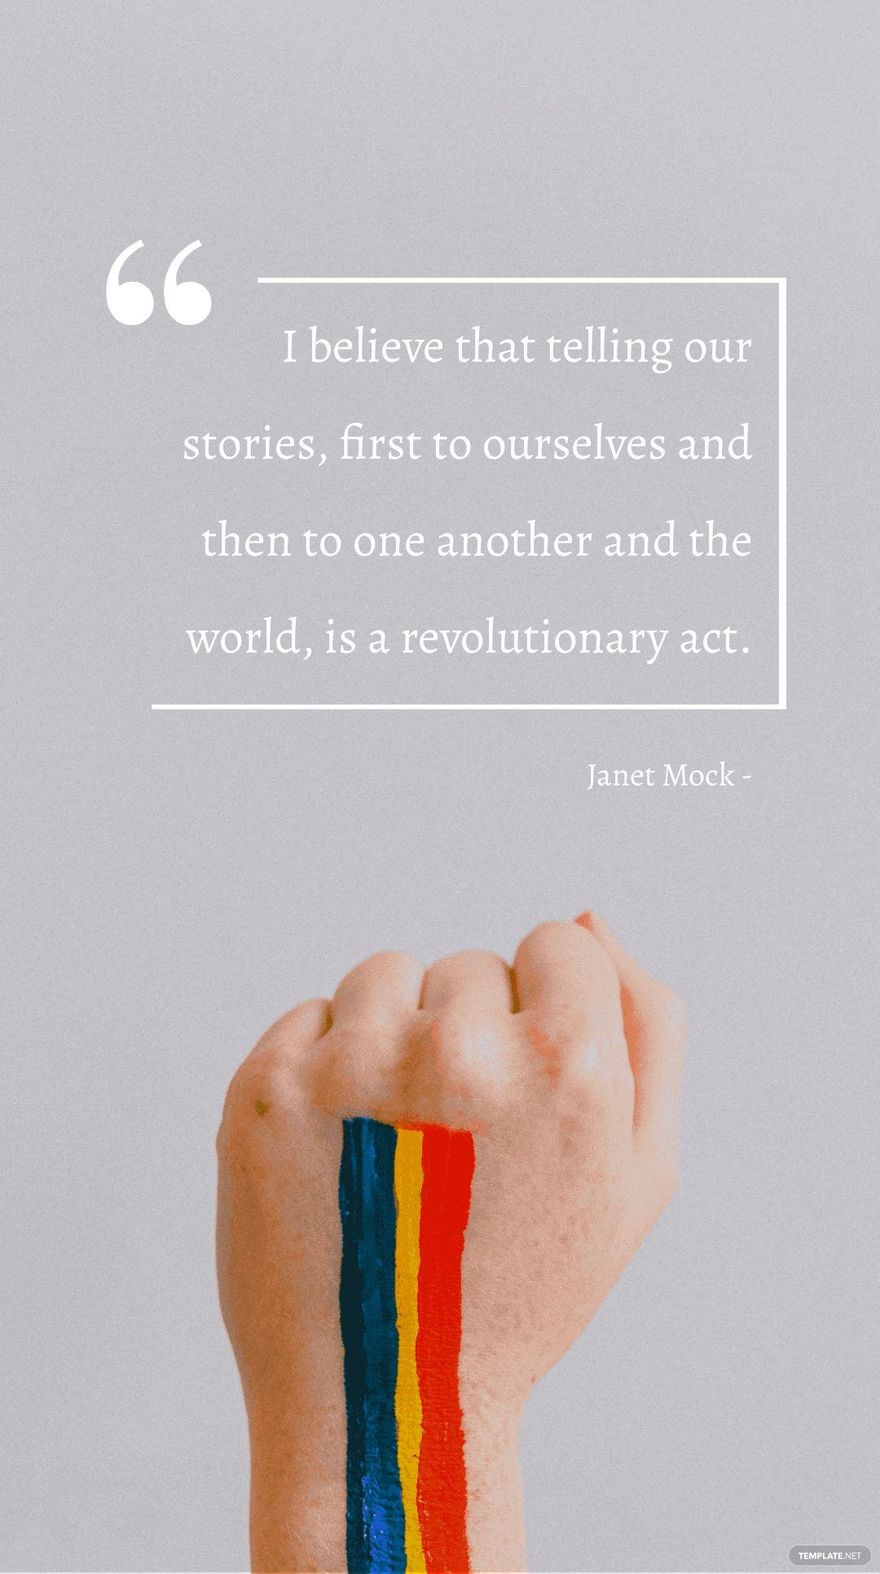 Janet Mock - I believe that telling our stories, first to ourselves and then to one another and the world, is a revolutionary act.